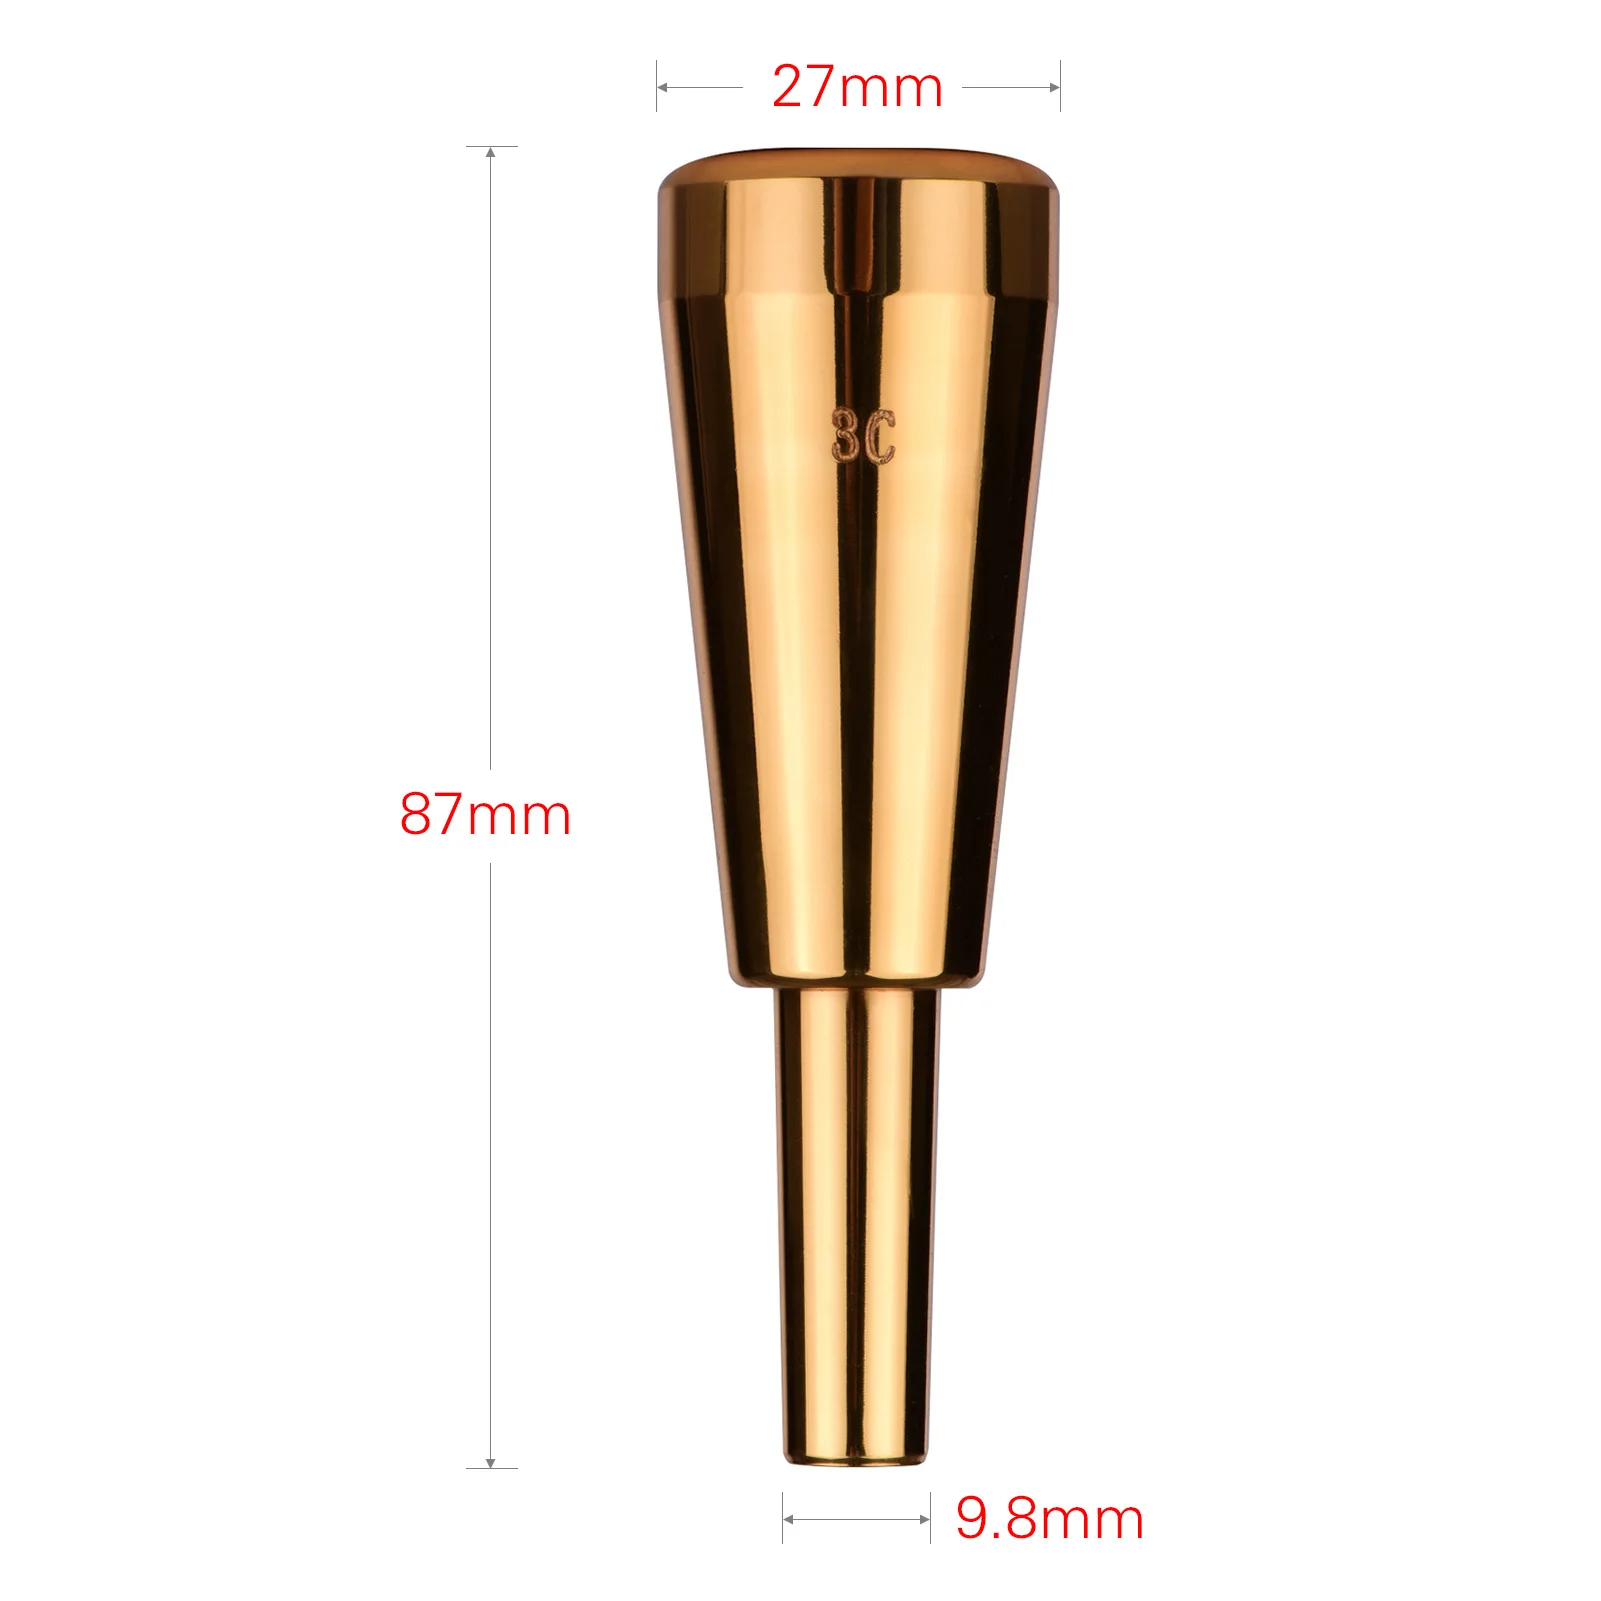 

3C Trumpet Mouthpiece Thickened Heavier Mouthpiece Instrument Accessory for Standard Trumpets